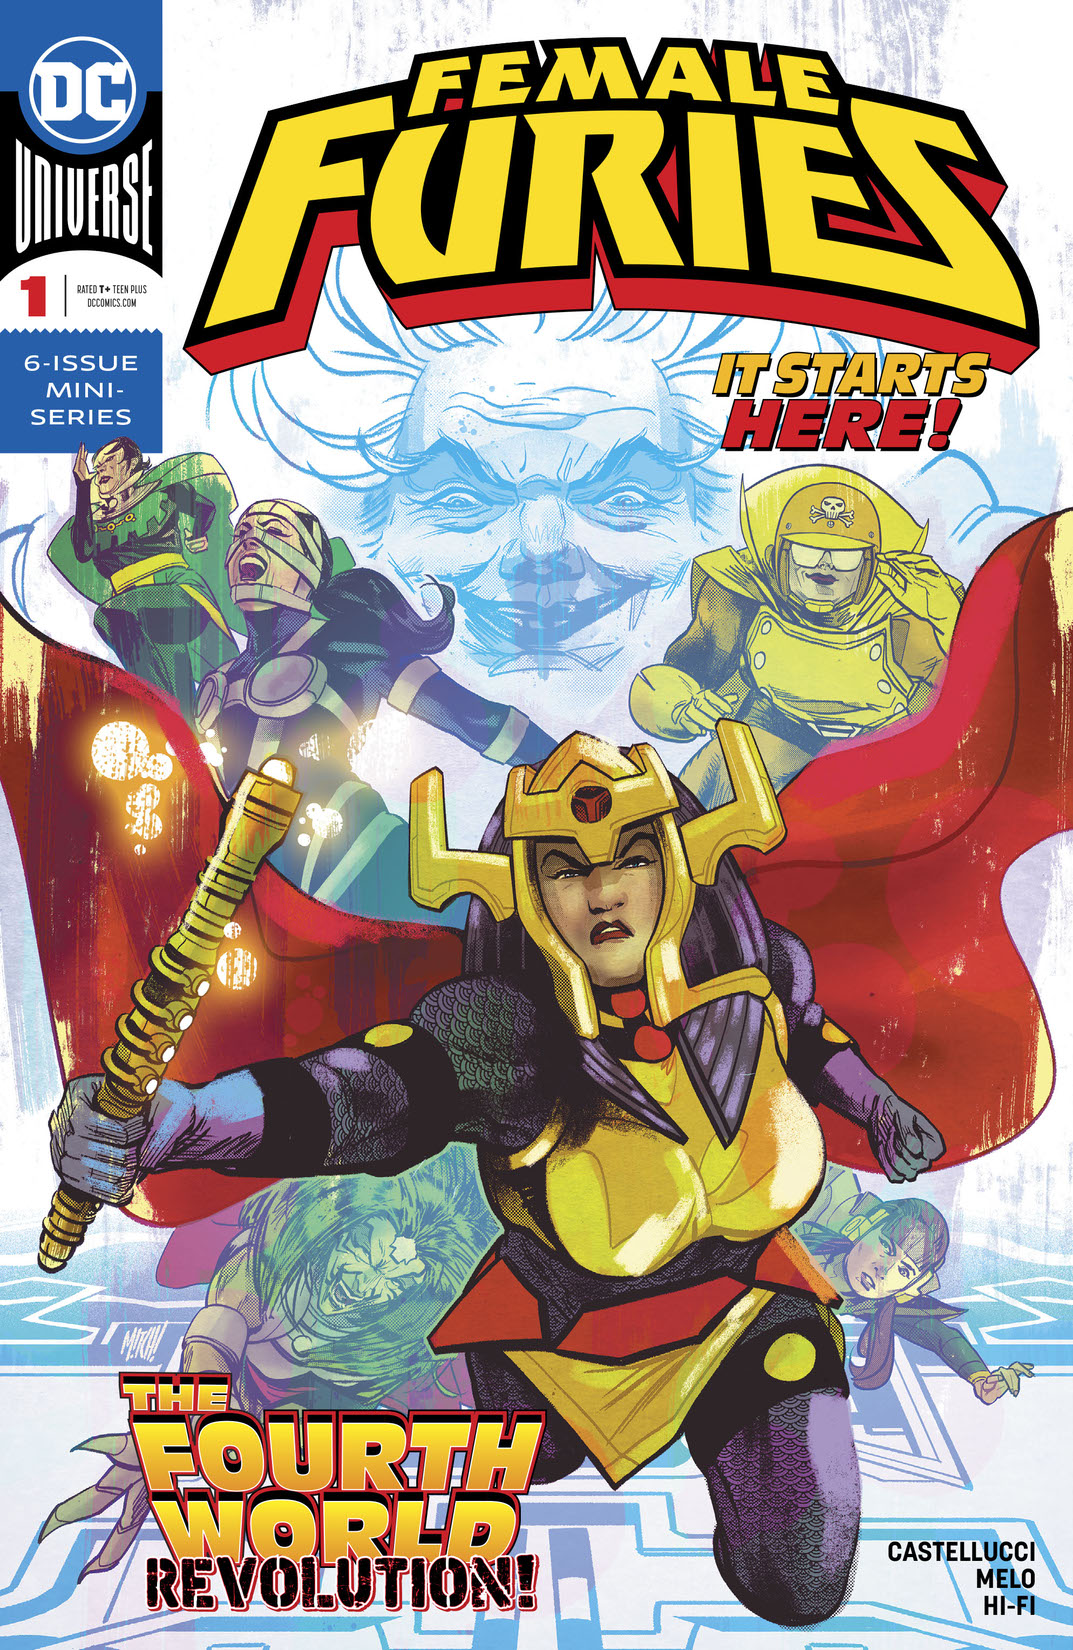 Female Furies #1 preview images